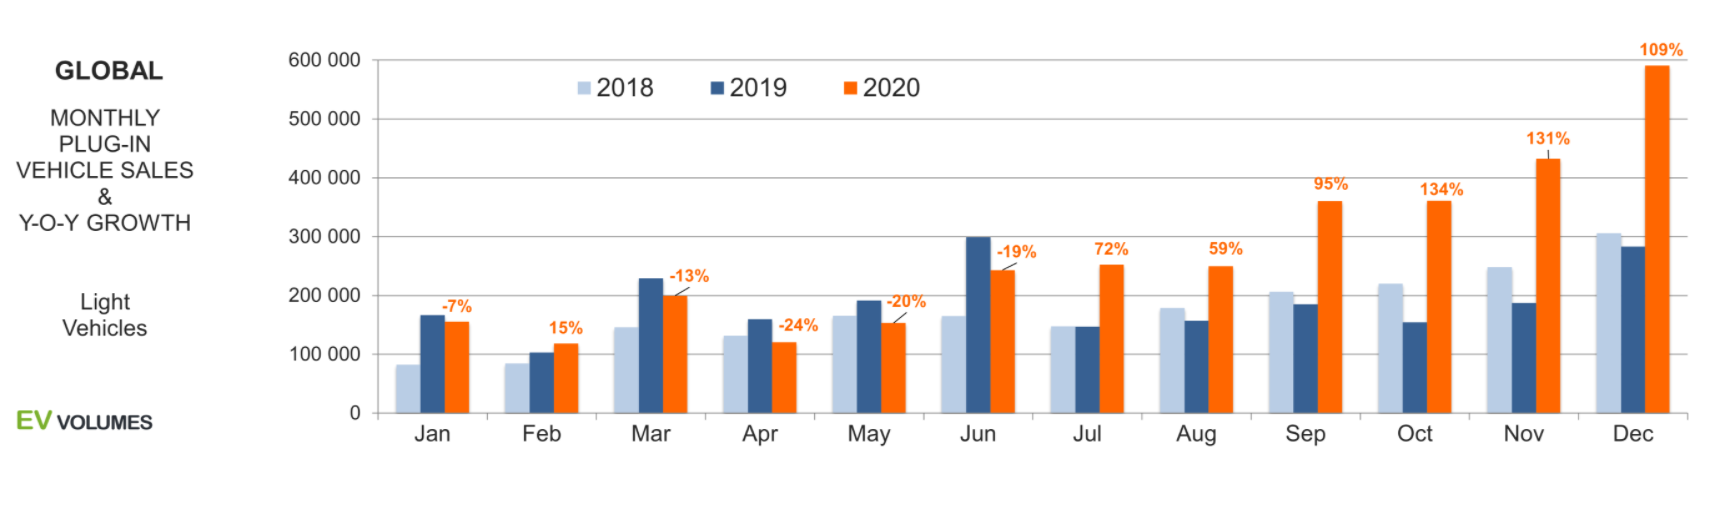 Global EV Sales and Growth 2018-2020